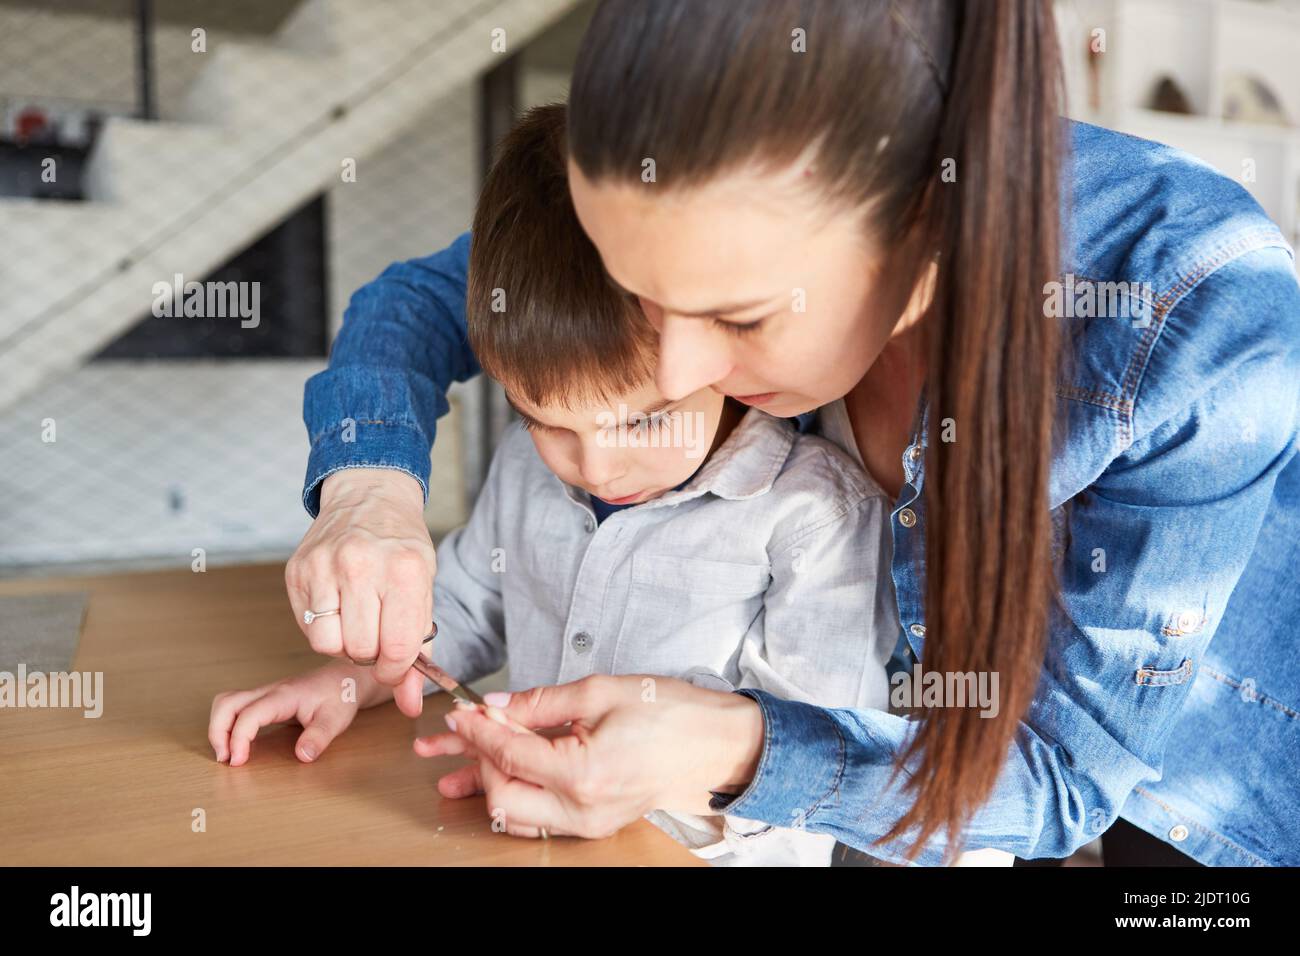 Caring and careful mother cutting nails of her son as body care Stock Photo